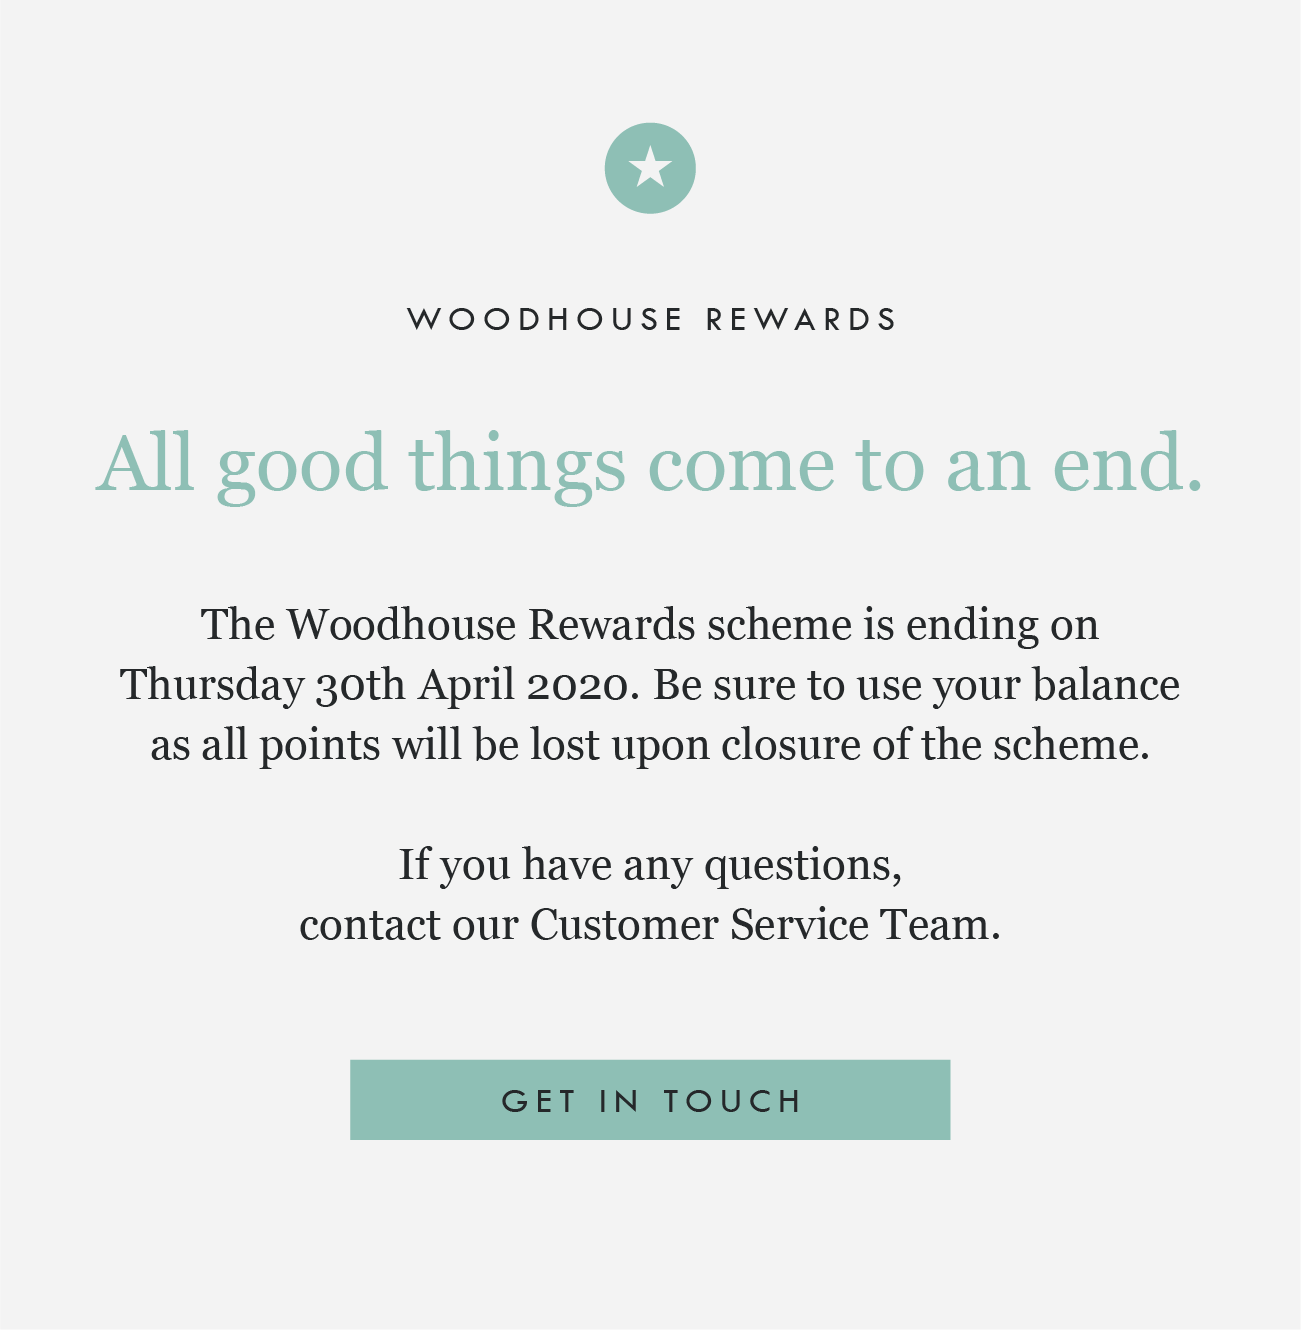 WOODHOUSE REWARDS

All good things come to an end.

The Woodhouse Rewards scheme is ending on Thursday 30th April 2020. Be sure to use your balance as all points will be lost upon closure of the scheme.

If you have any questions, contact our Customer Service Team.

GET IN TOUCH